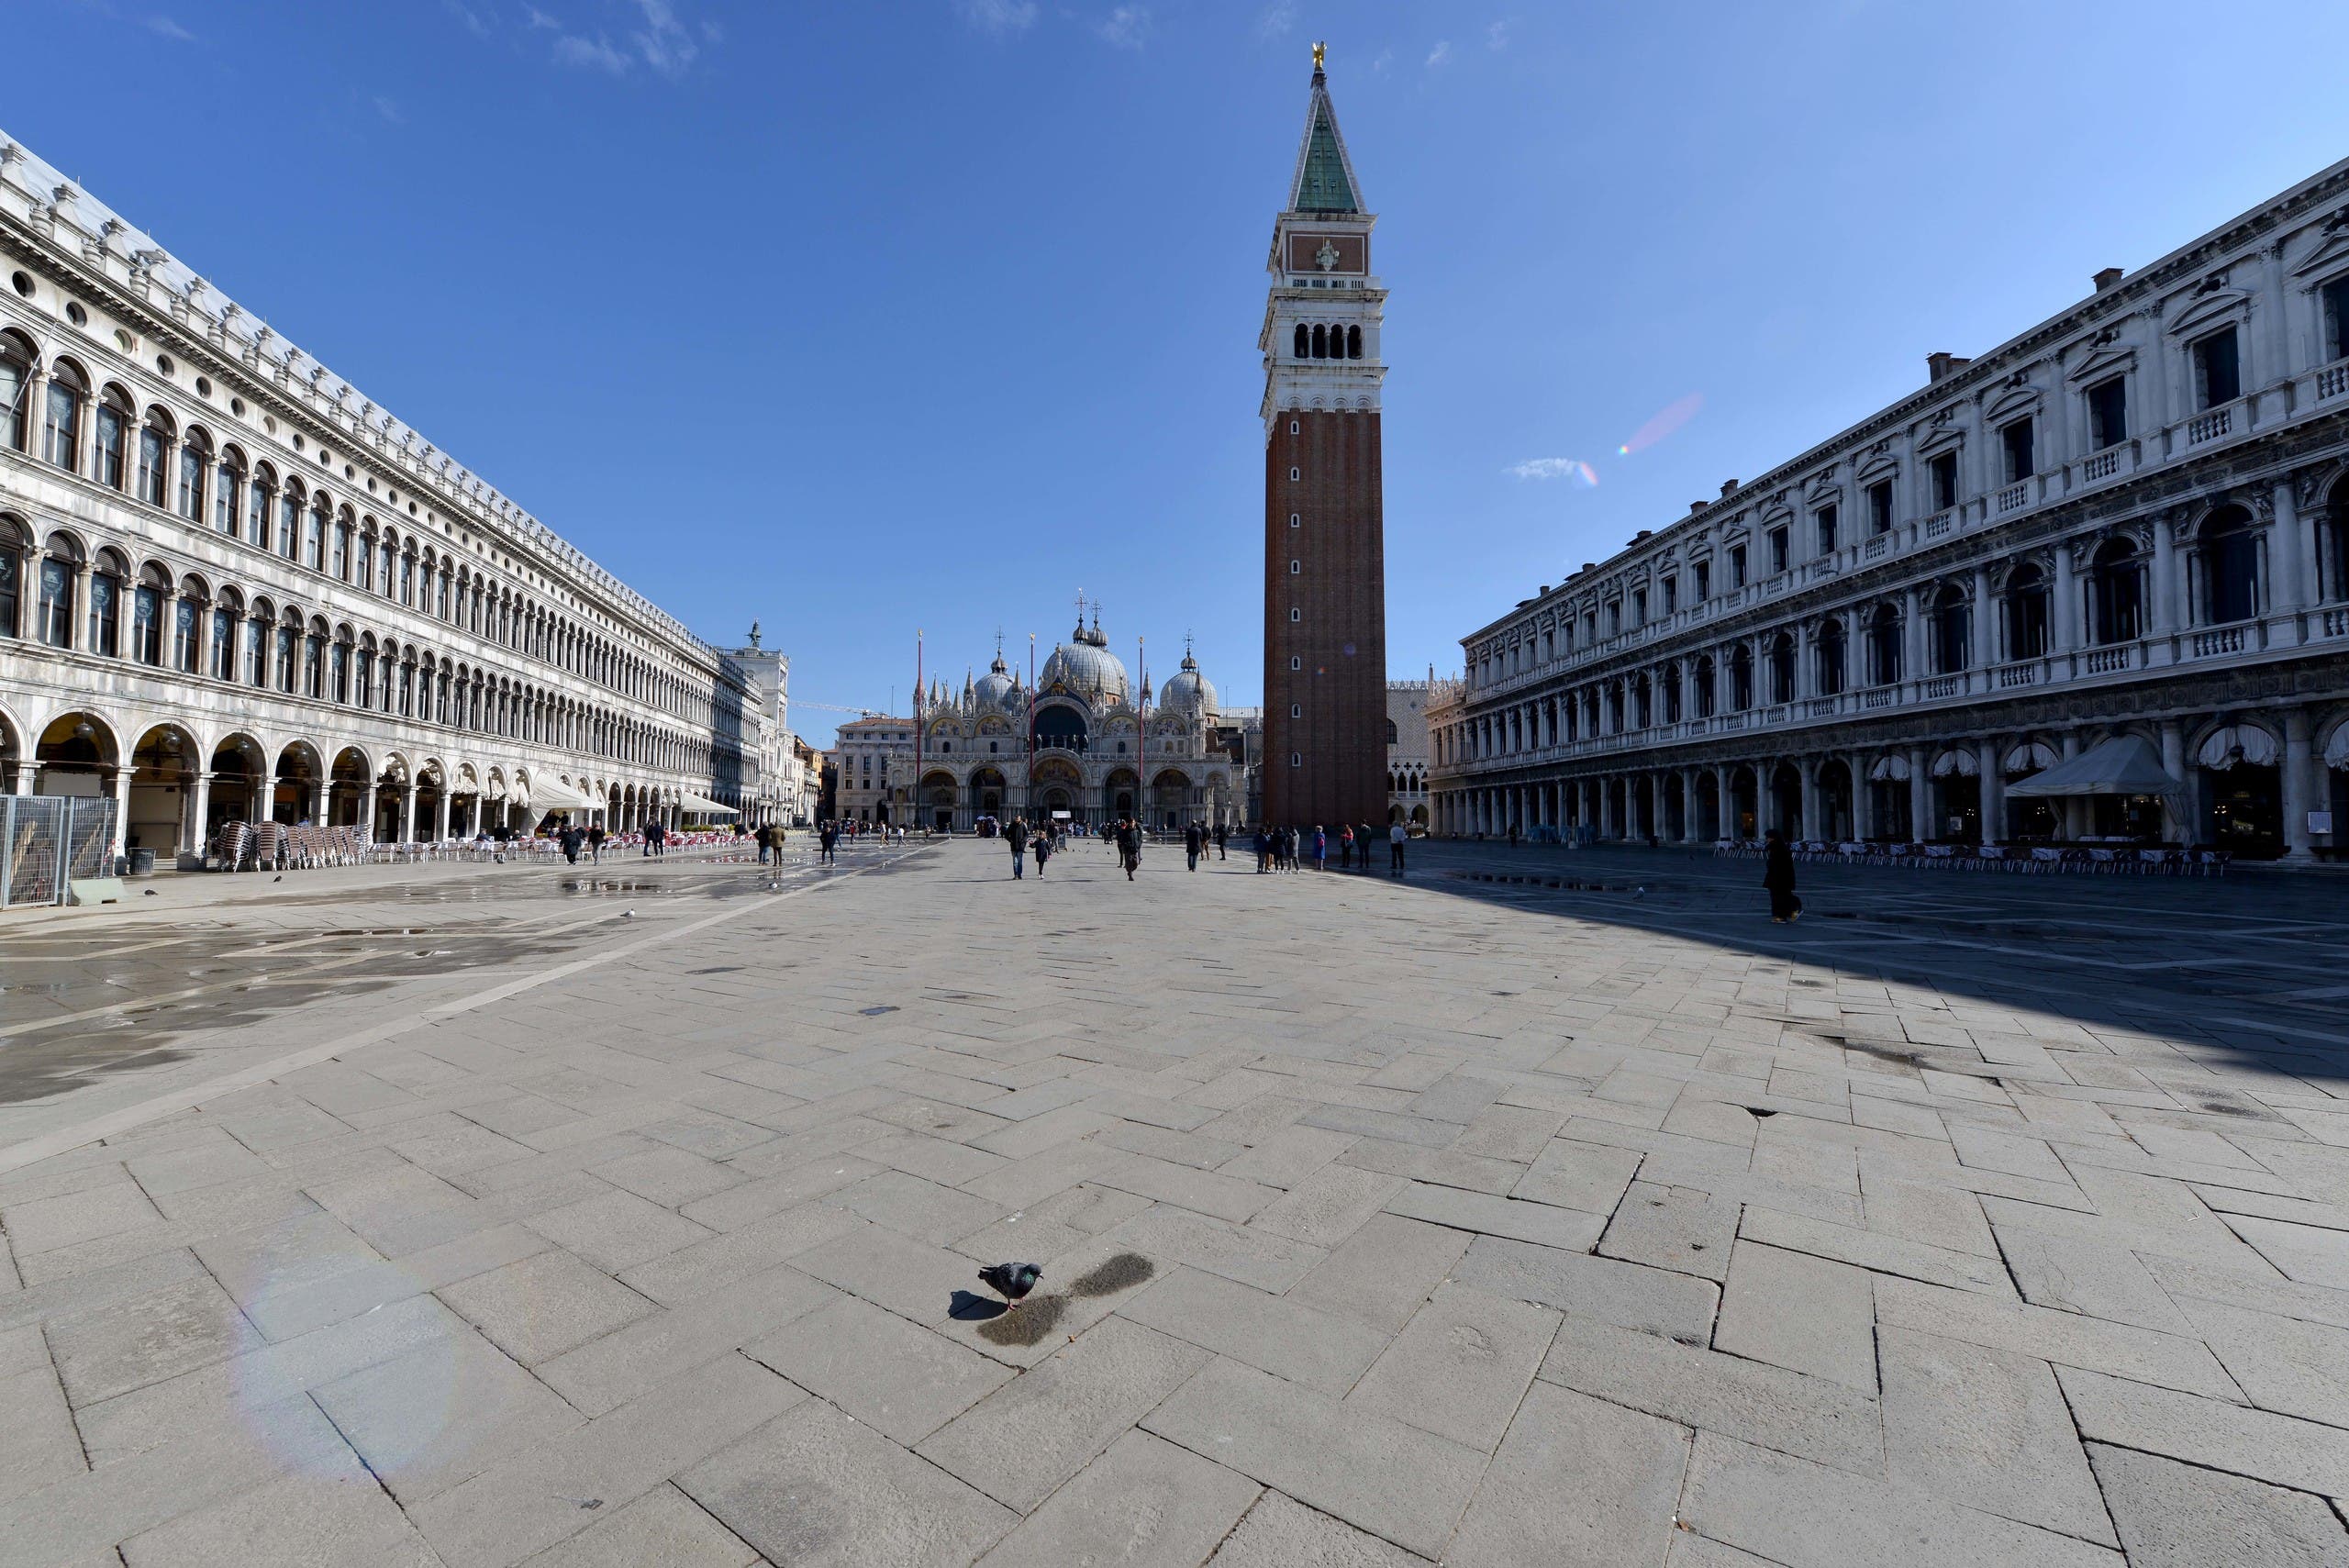 San Marco's main square in the city was empty of tourists last March due to Corona